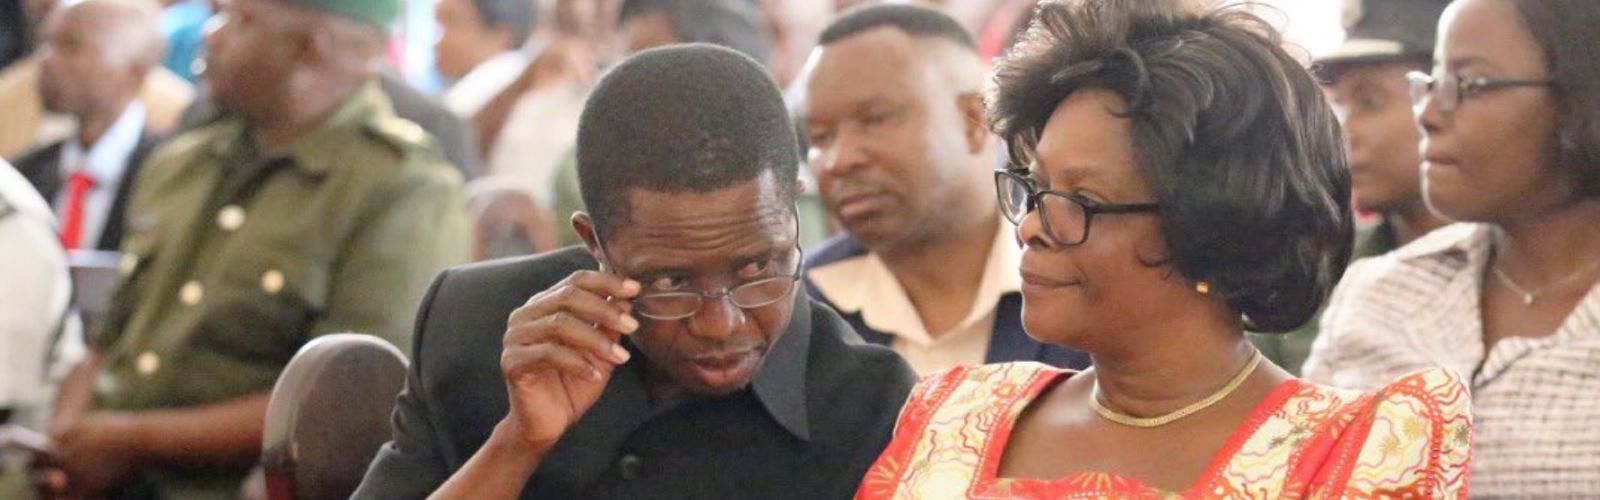 LUNGU: “I will not let the Patriotic Front die”